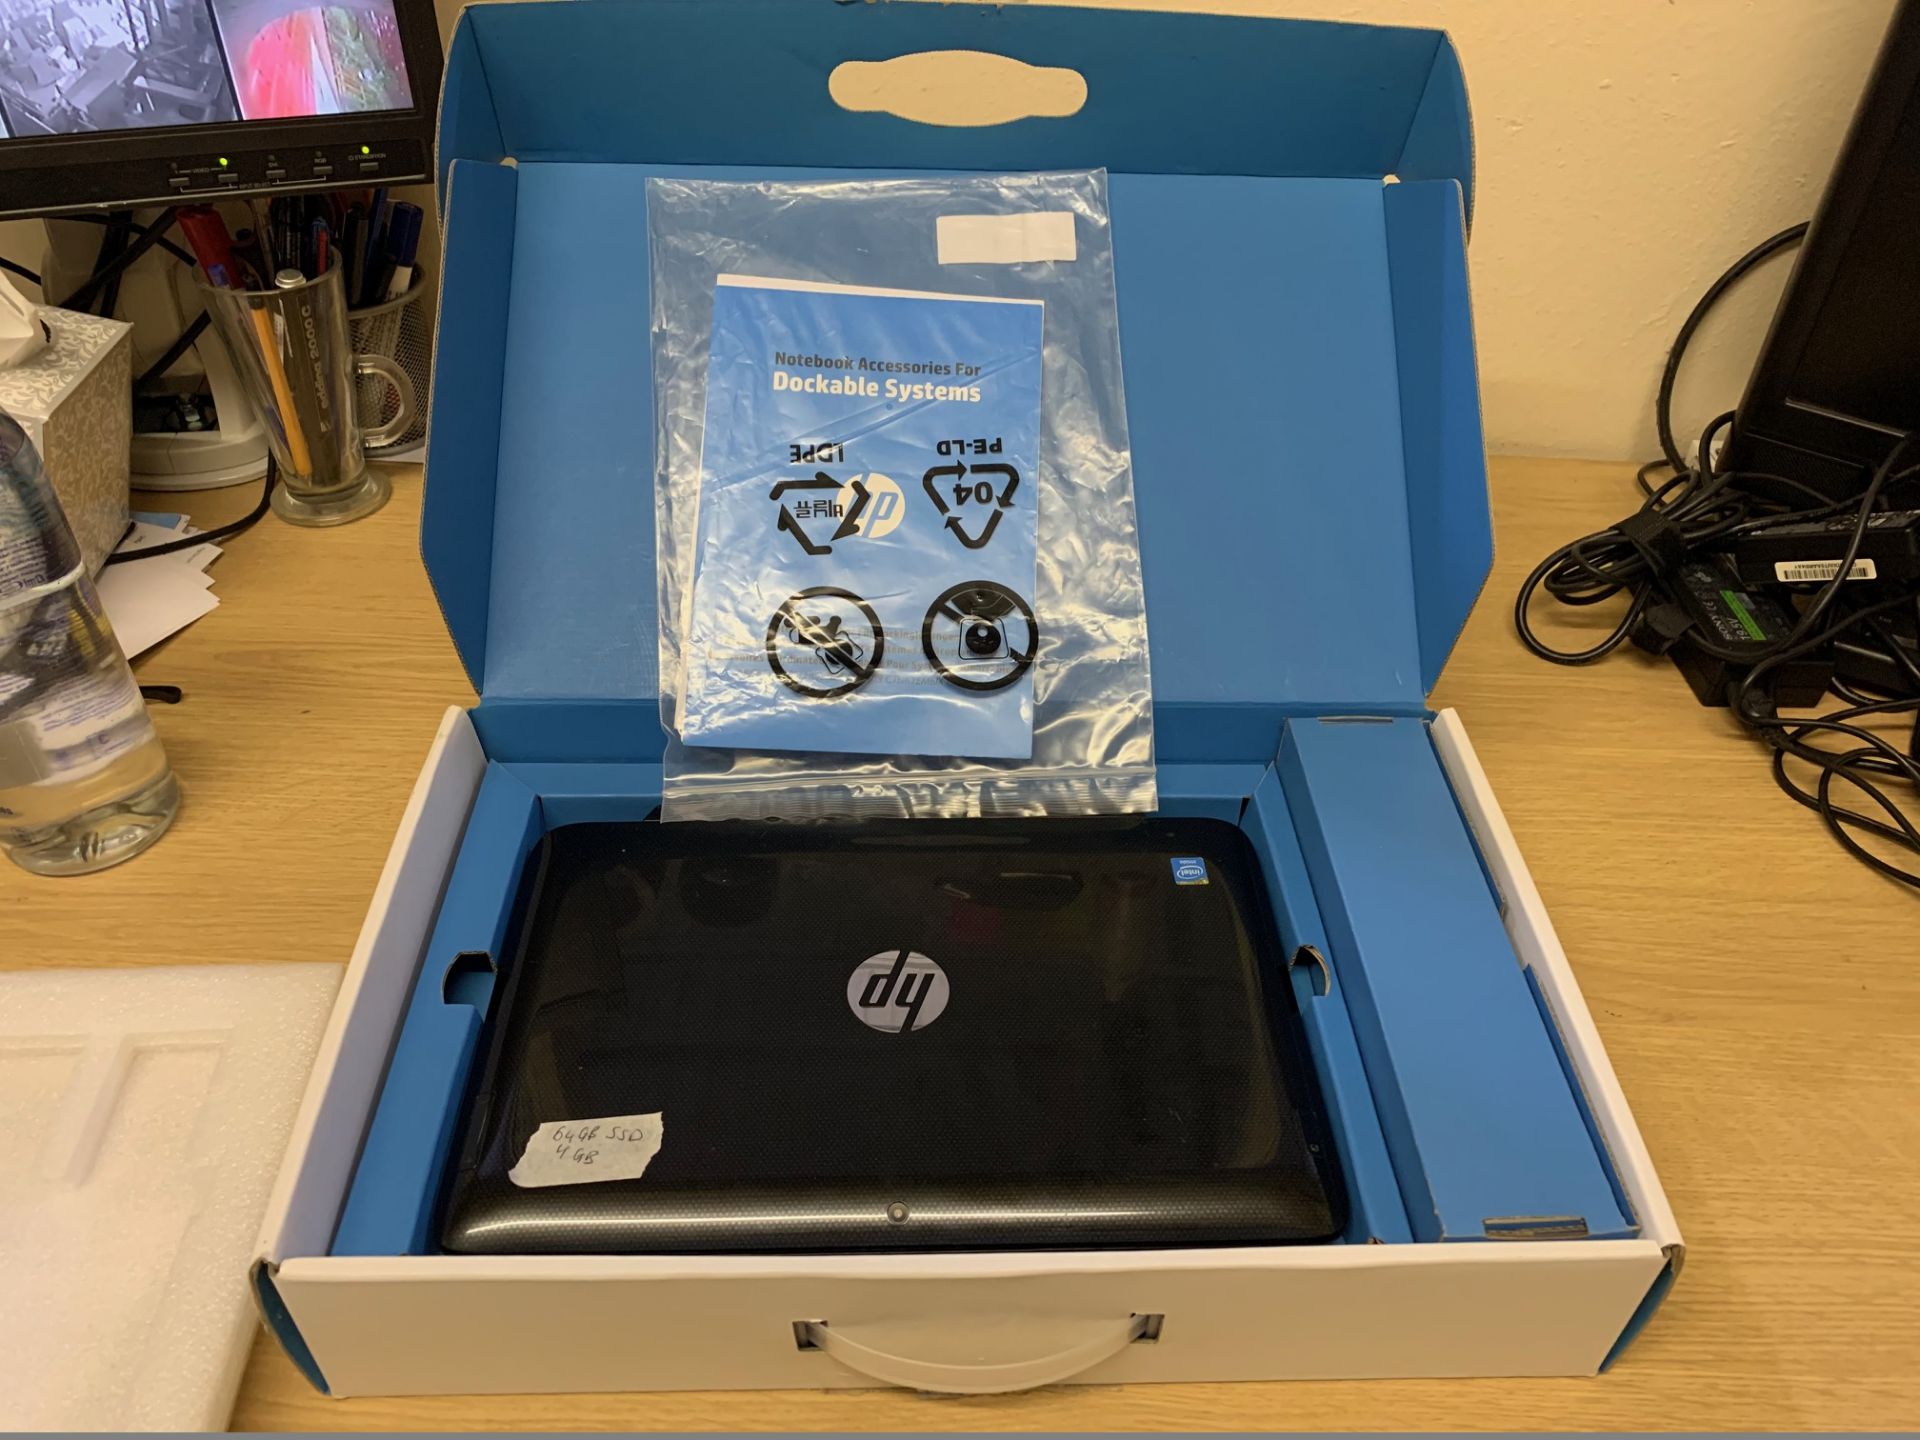 HP Envy Atom 22760 - 1.80GHz, 64GB SSD, 2GB RAM, Loaded With Windows 10 & Comes Boxed With Charger - Image 2 of 5